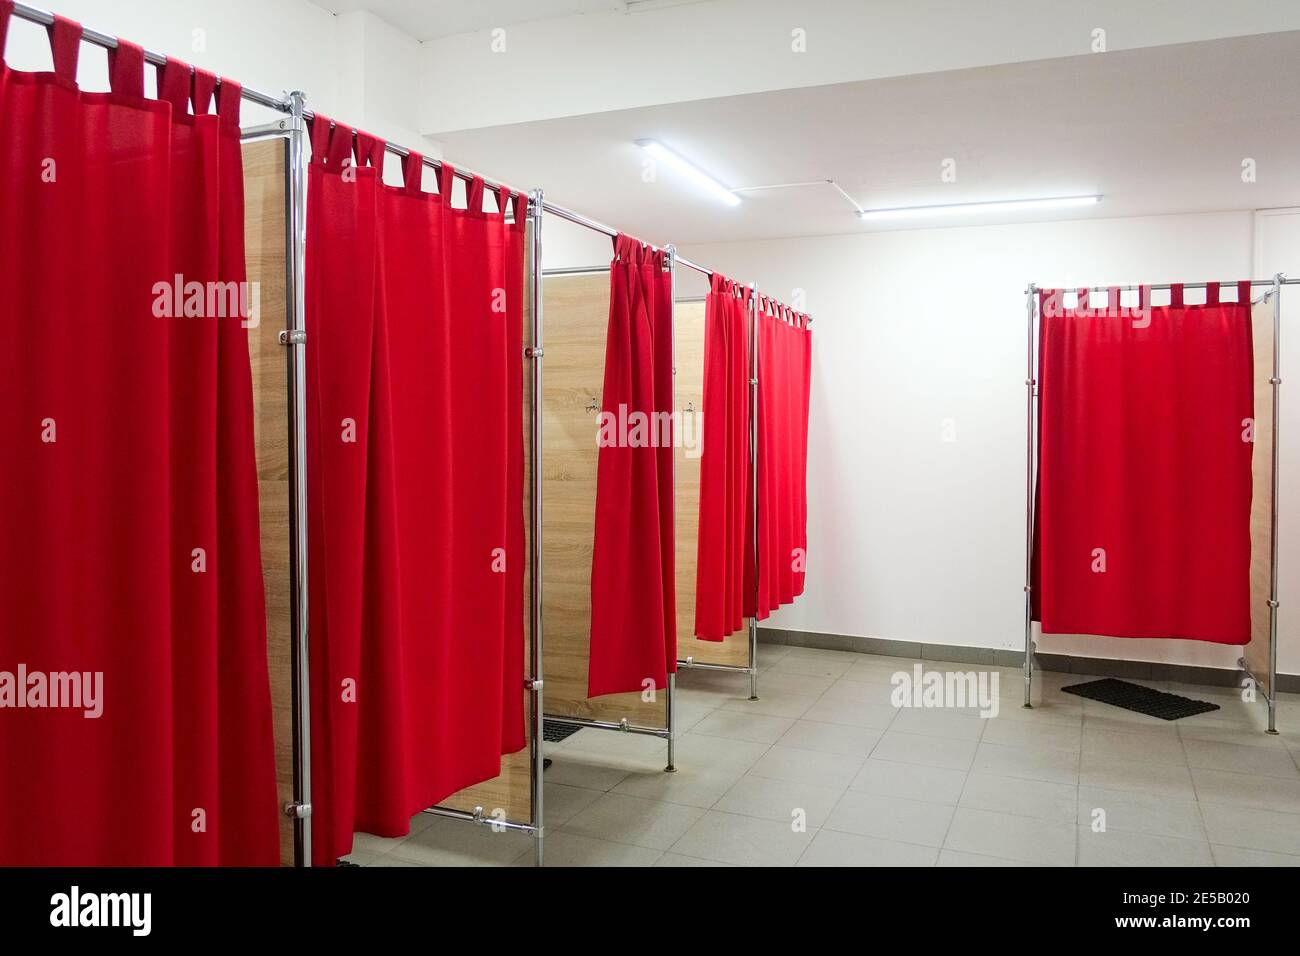 Empty fitting rooms with red curtains and white walls. Dressing rooms in clothing store with no people Stock Photo